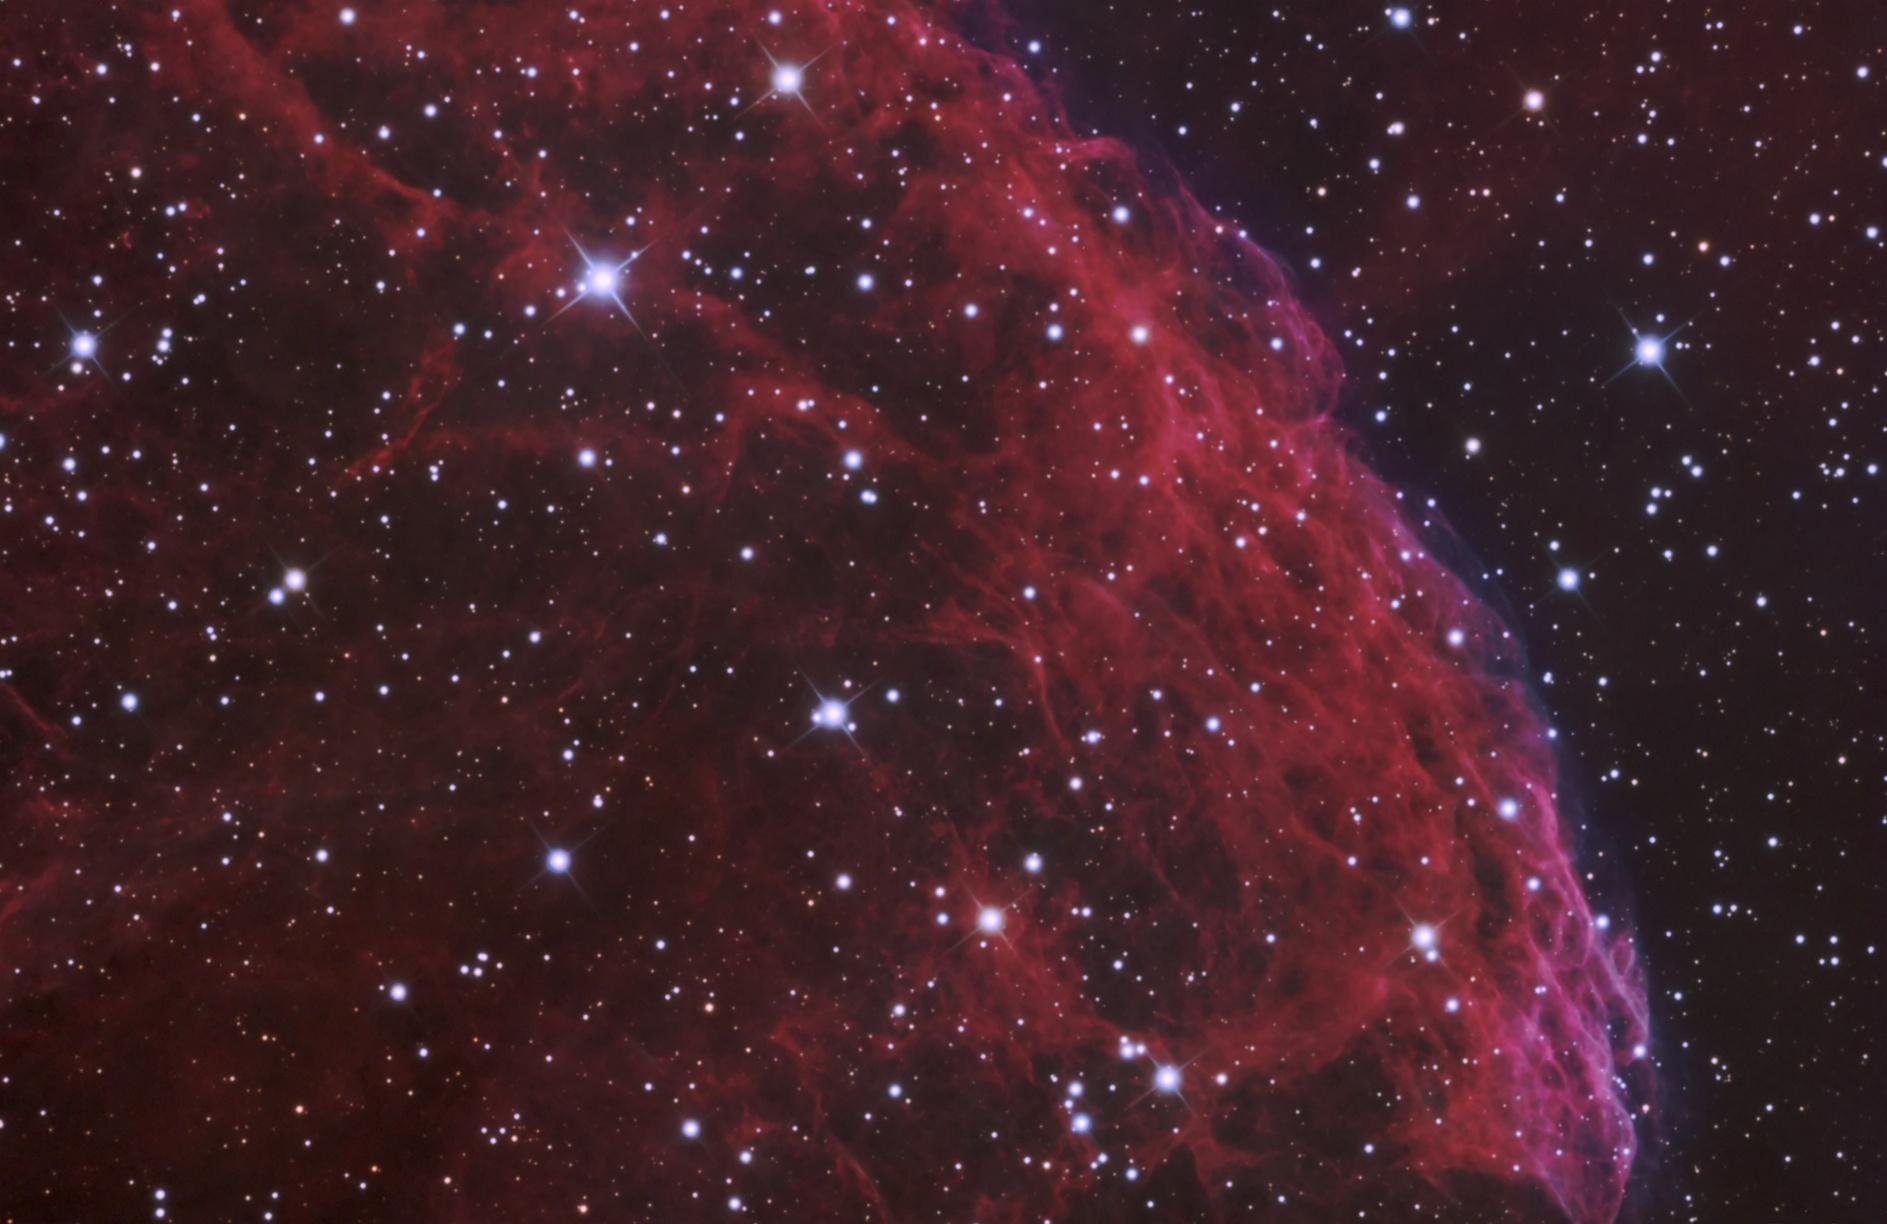 Supernova Remnant IC 443 - Click on this image to return to the smaller version of the image